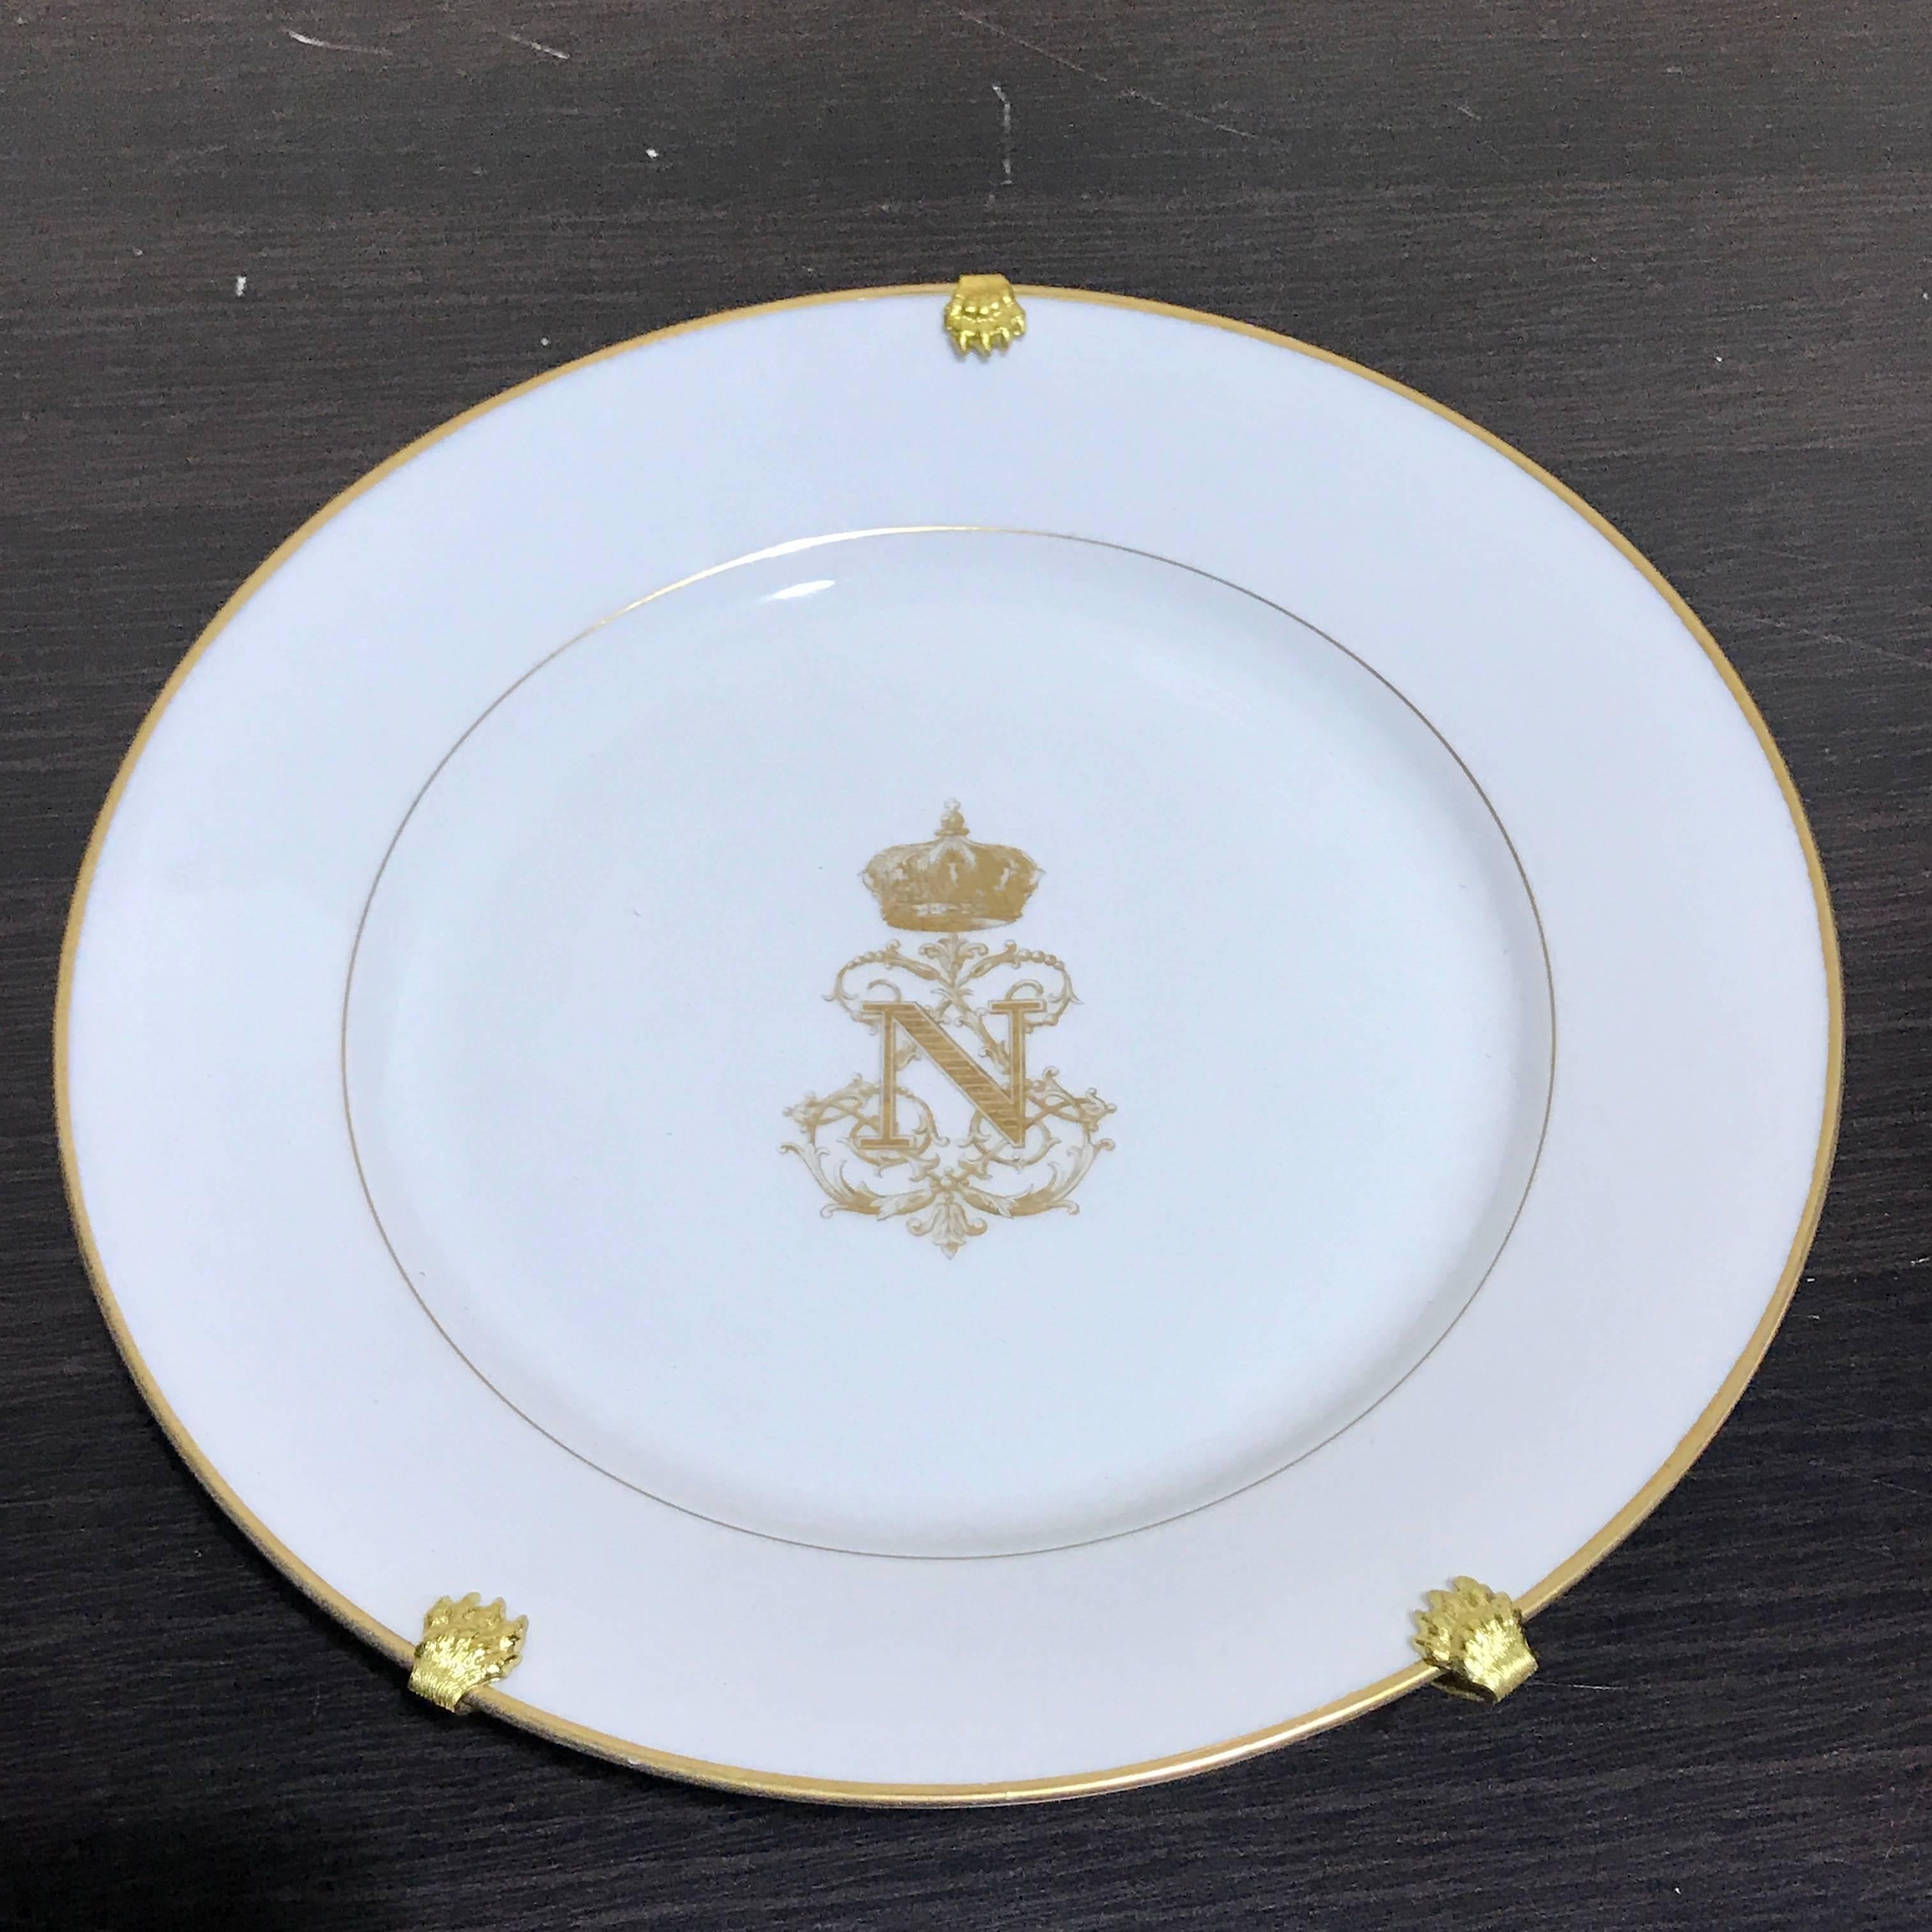 A plate from the service of Napoleon III, French Emperor from 1852-1870.
Manufacture Nationale de Sèvres, Each plate bears the Royal Cypher of Napoleon, N surmounted by the Imperial Crown.
The plate has the date of manufacture of the blank, 1857,